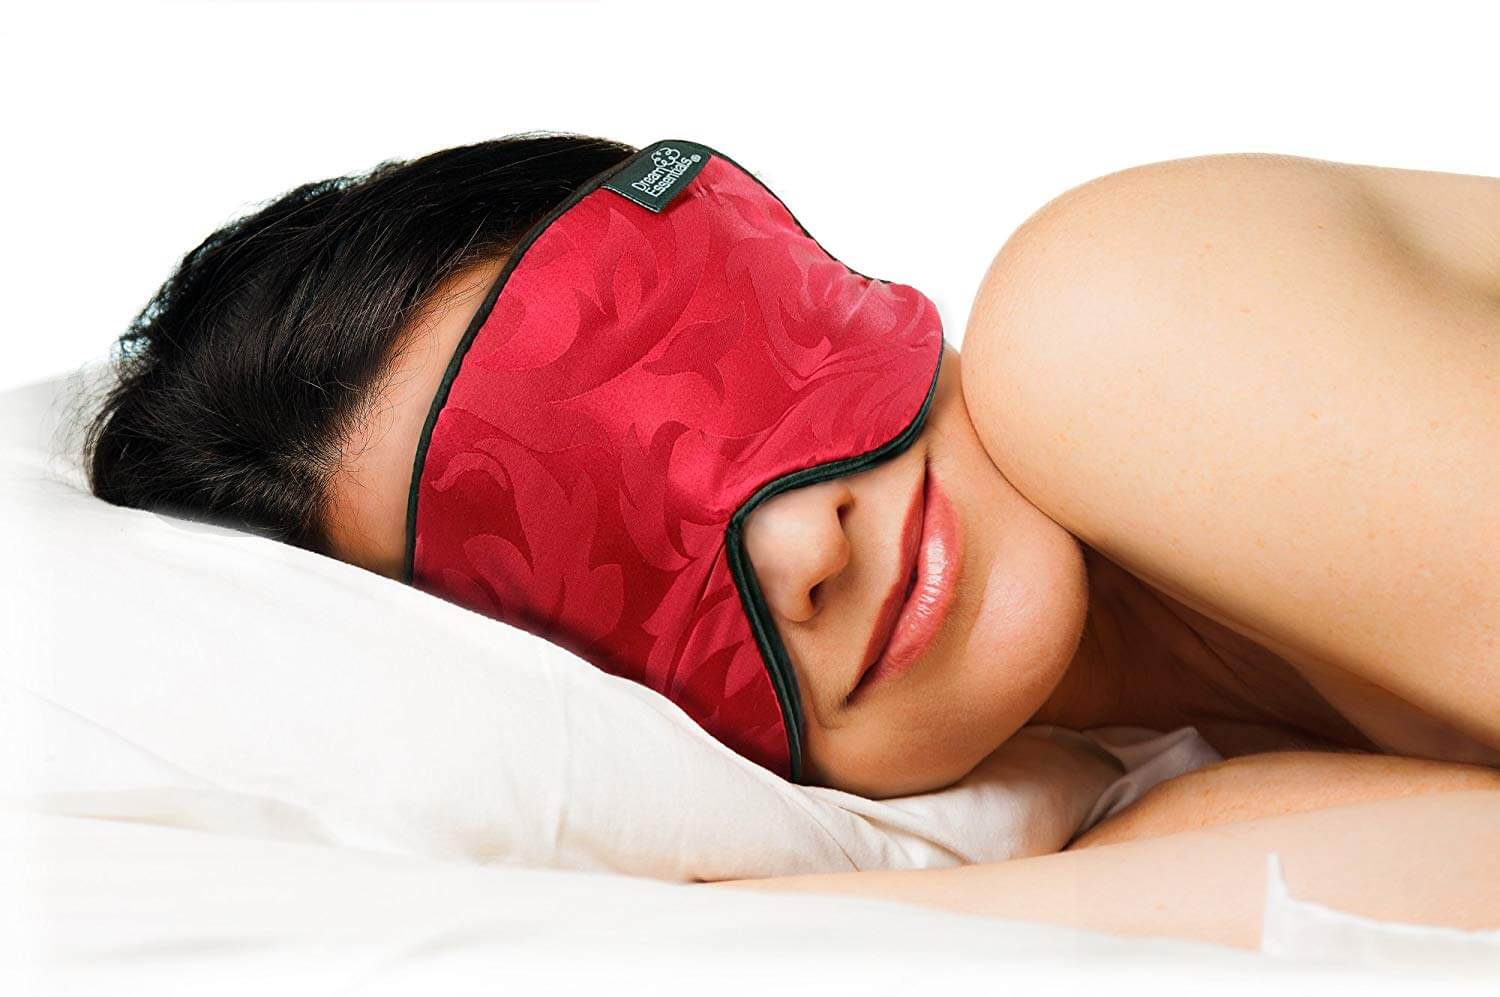 Dream Essentials Ultra Silk 360 Sleep Mask, Red Jacquard, All Natural Hypoallergenic Mulberry Silk, 2 Fully Adjustable Straps, Thin Profile mask Great for Side, Stomach or Back Sleepers